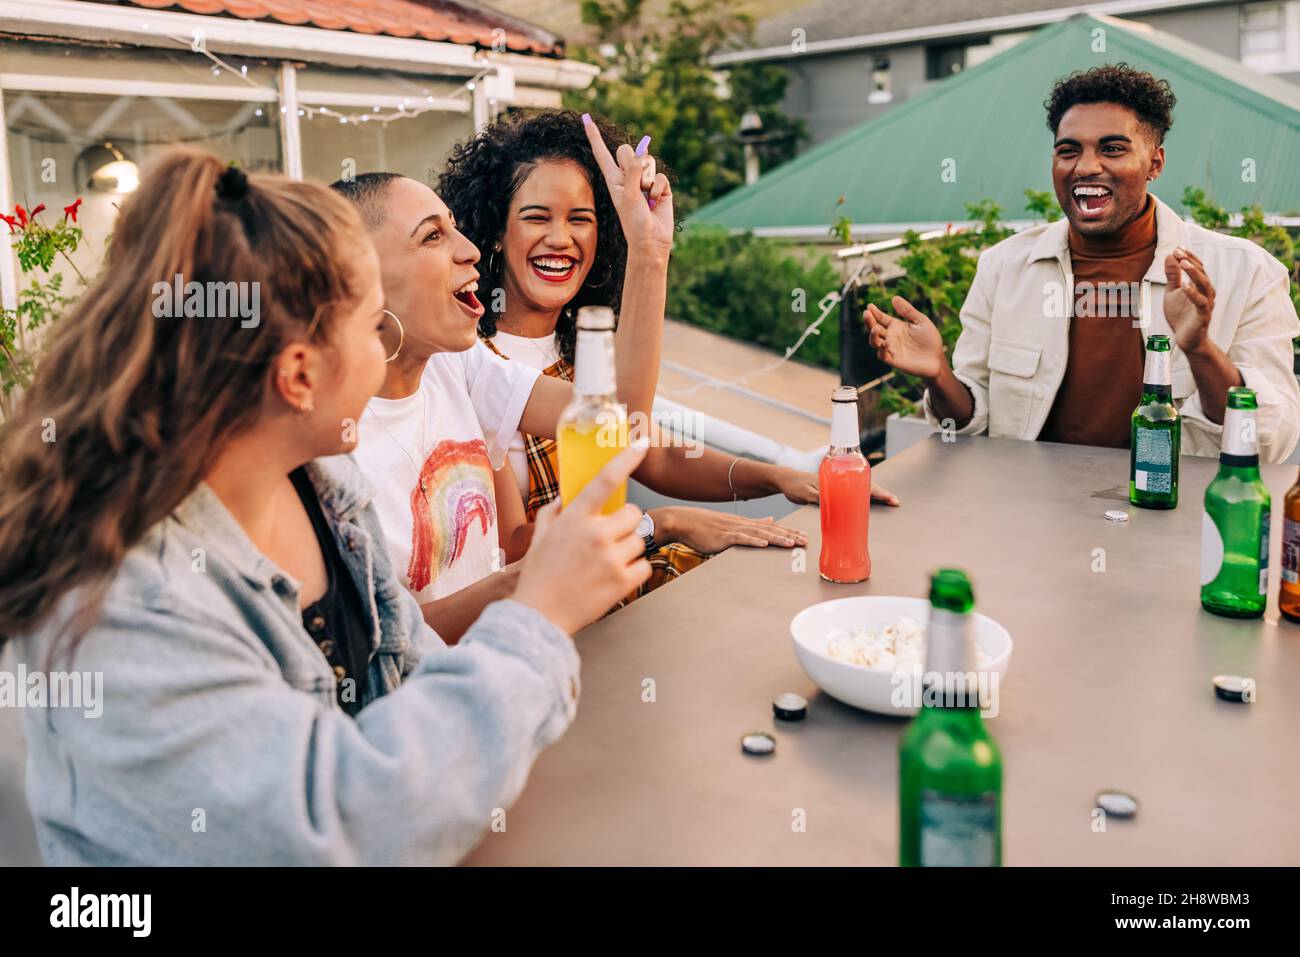 Having cold beers and a good time. Group of happy young people laughing together while hanging out on a rooftop. Cheerful friends enjoying alcoholic d Stock Photo